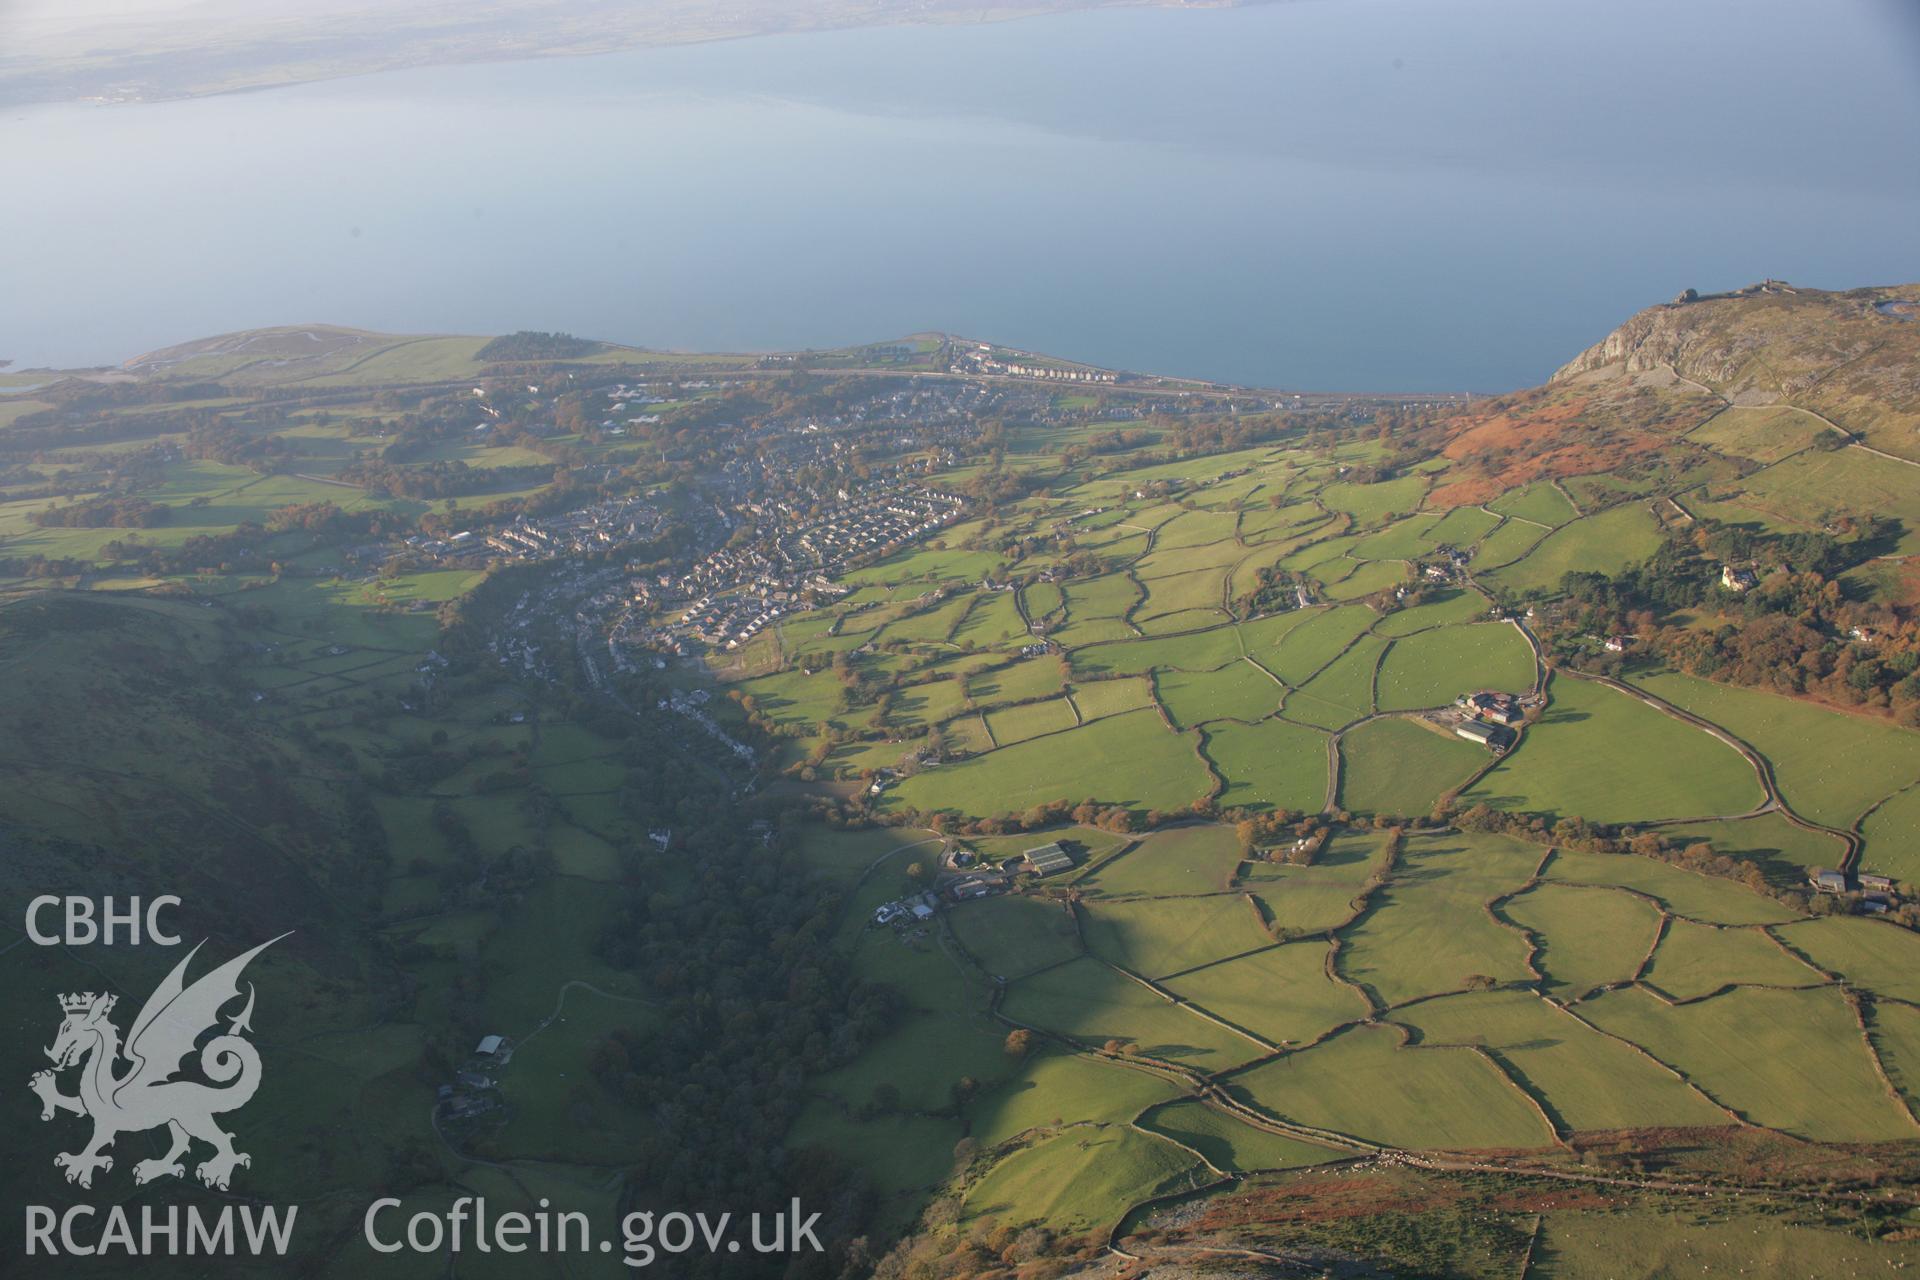 RCAHMW colour oblique aerial photograph of Llanfairfechan showing landscape view from the south-east. Taken on 21 November 2005 by Toby Driver